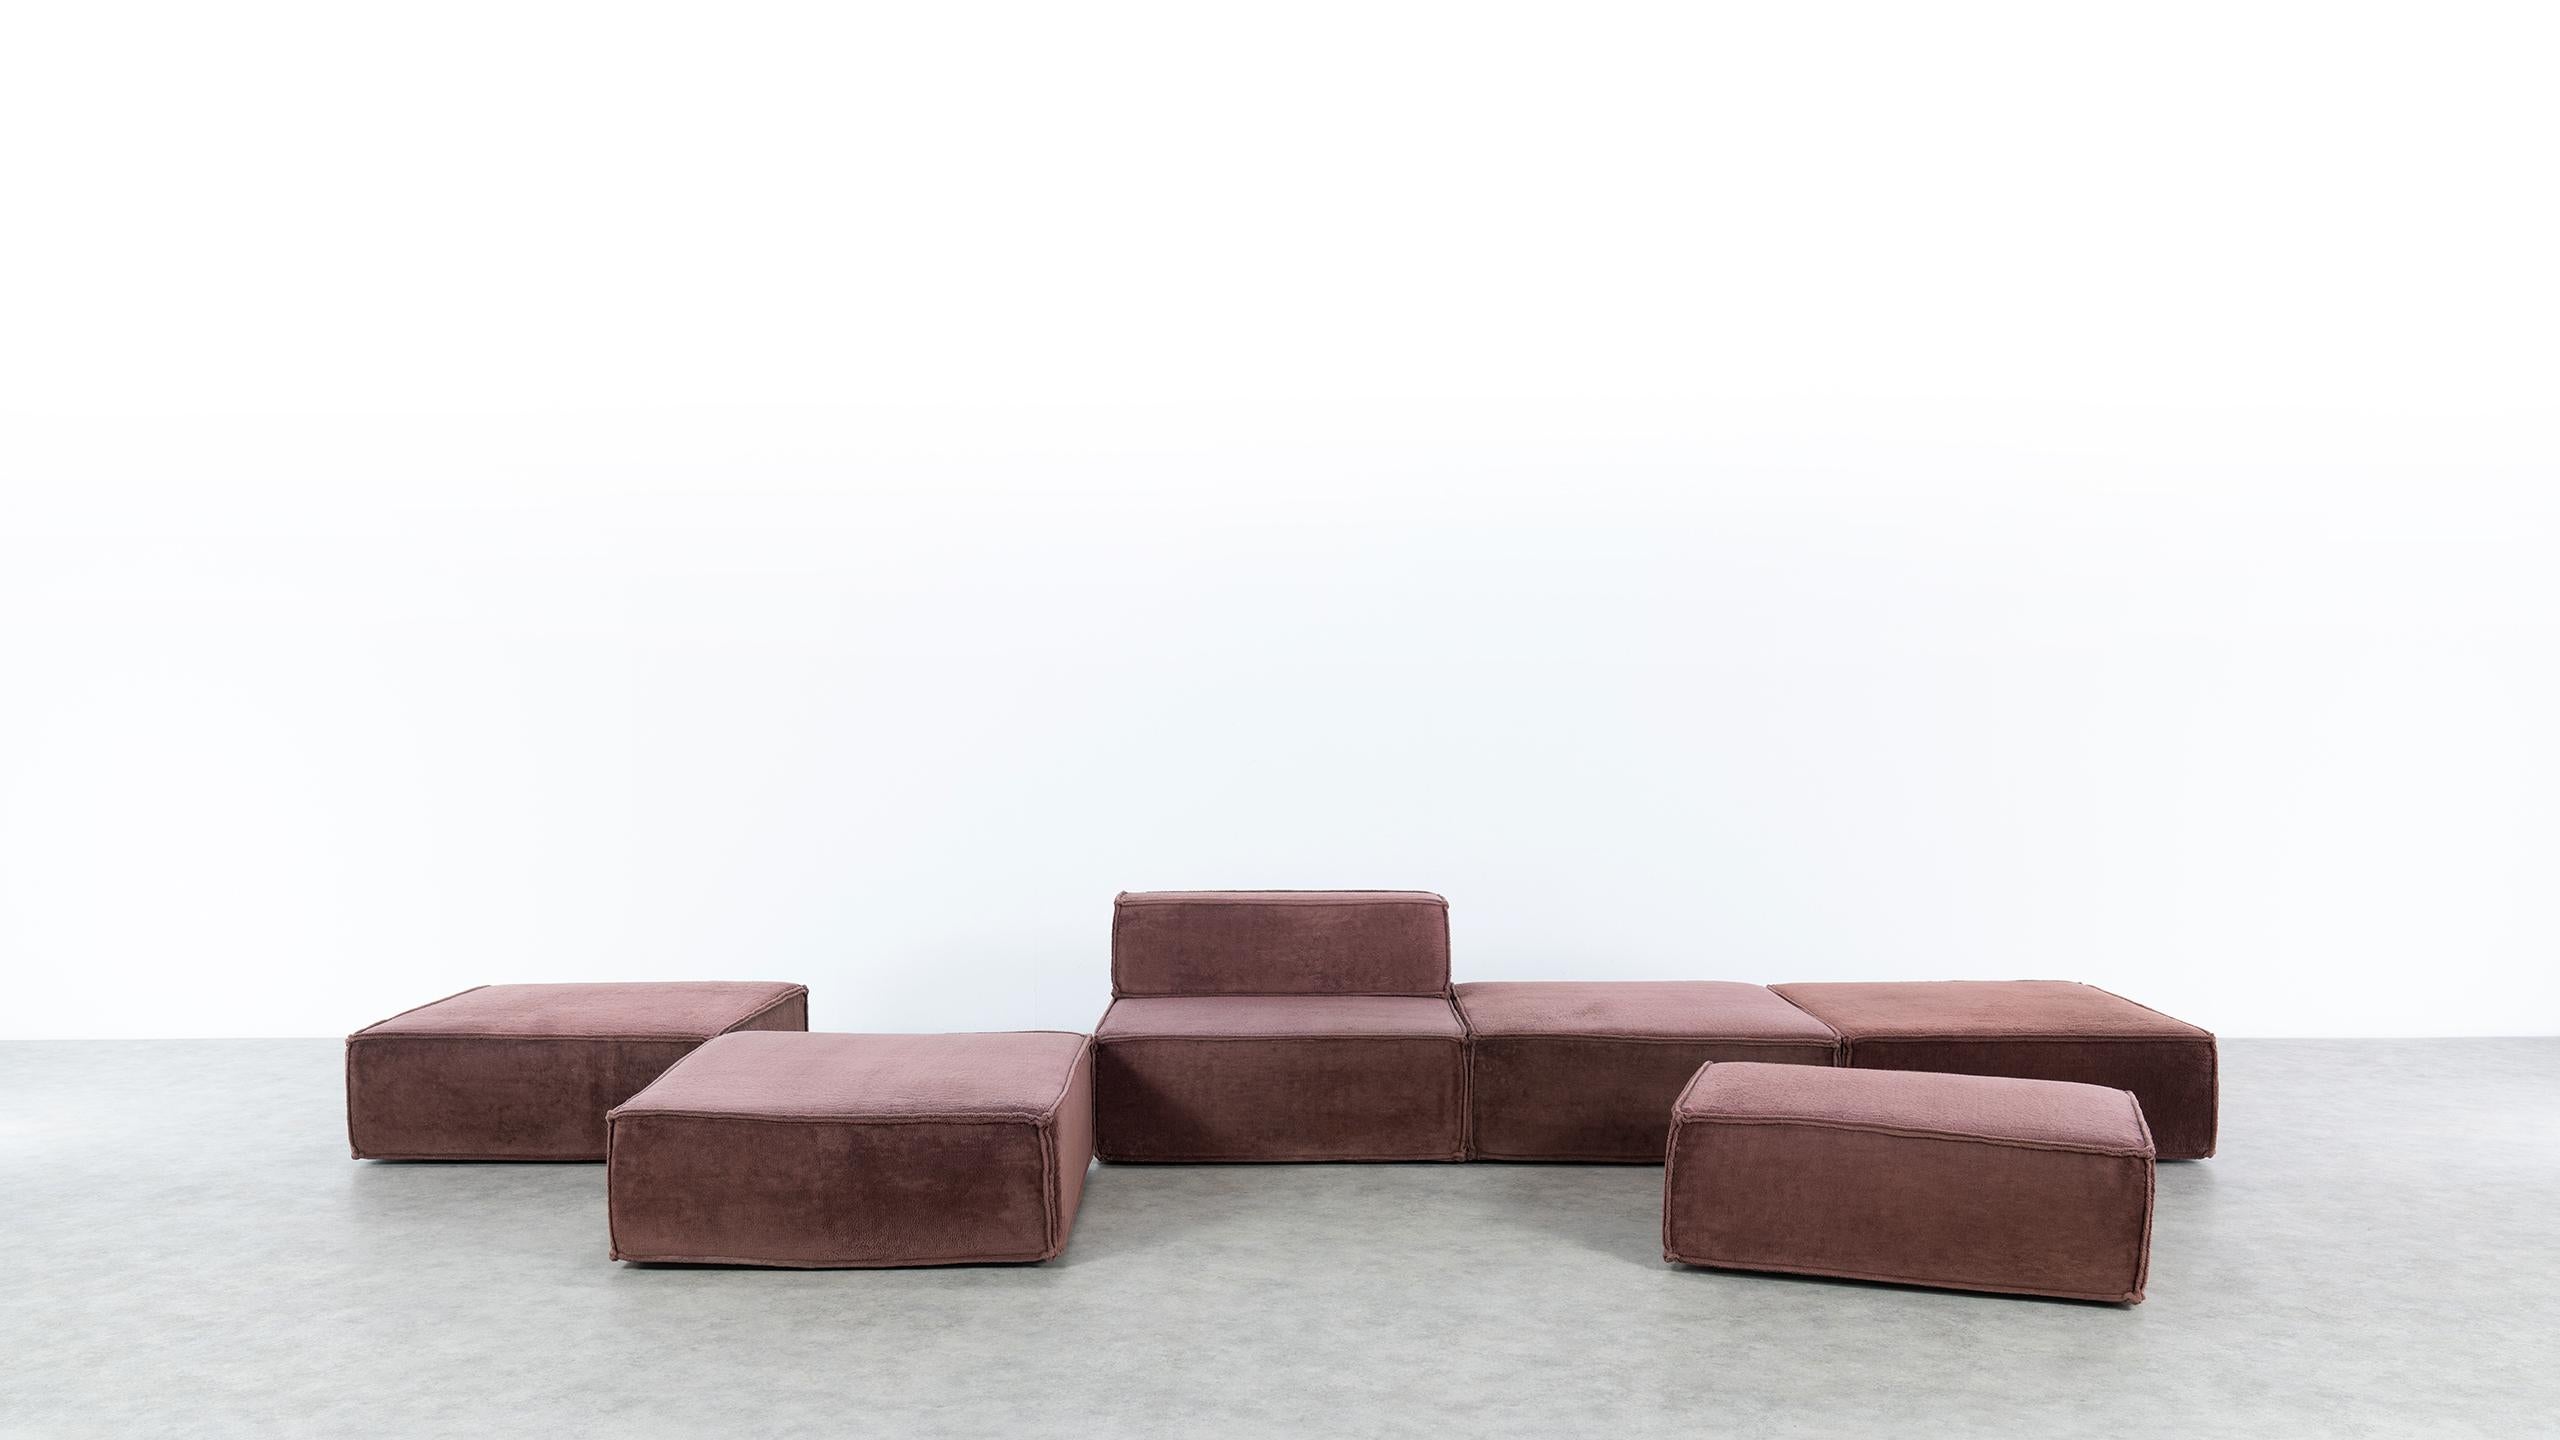 Fabric COR Trio Modular Sofa, Giant Landscape in Brown, 1972 by Team Form AG, Swiss